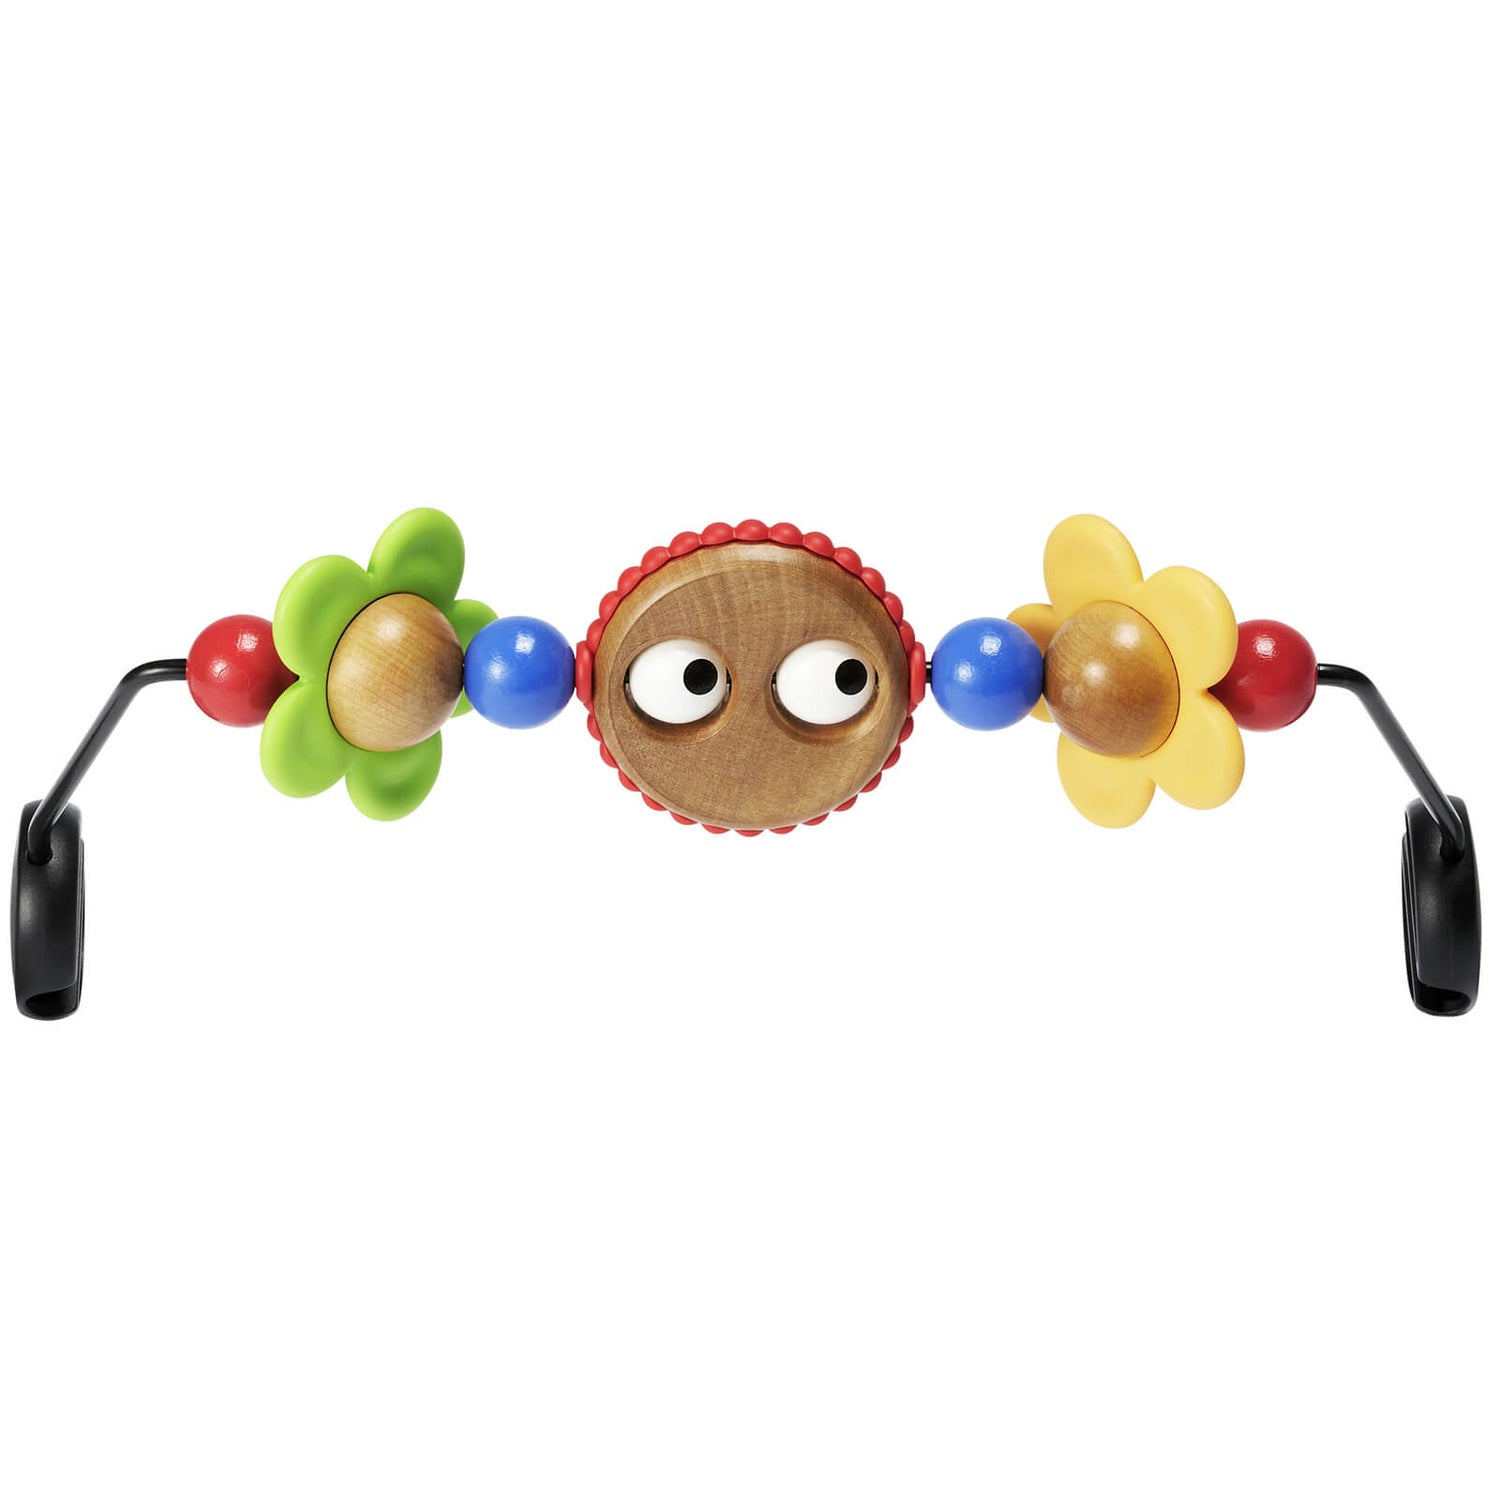 BABYBJÖRN Toy for Bouncers - Googly Eyes